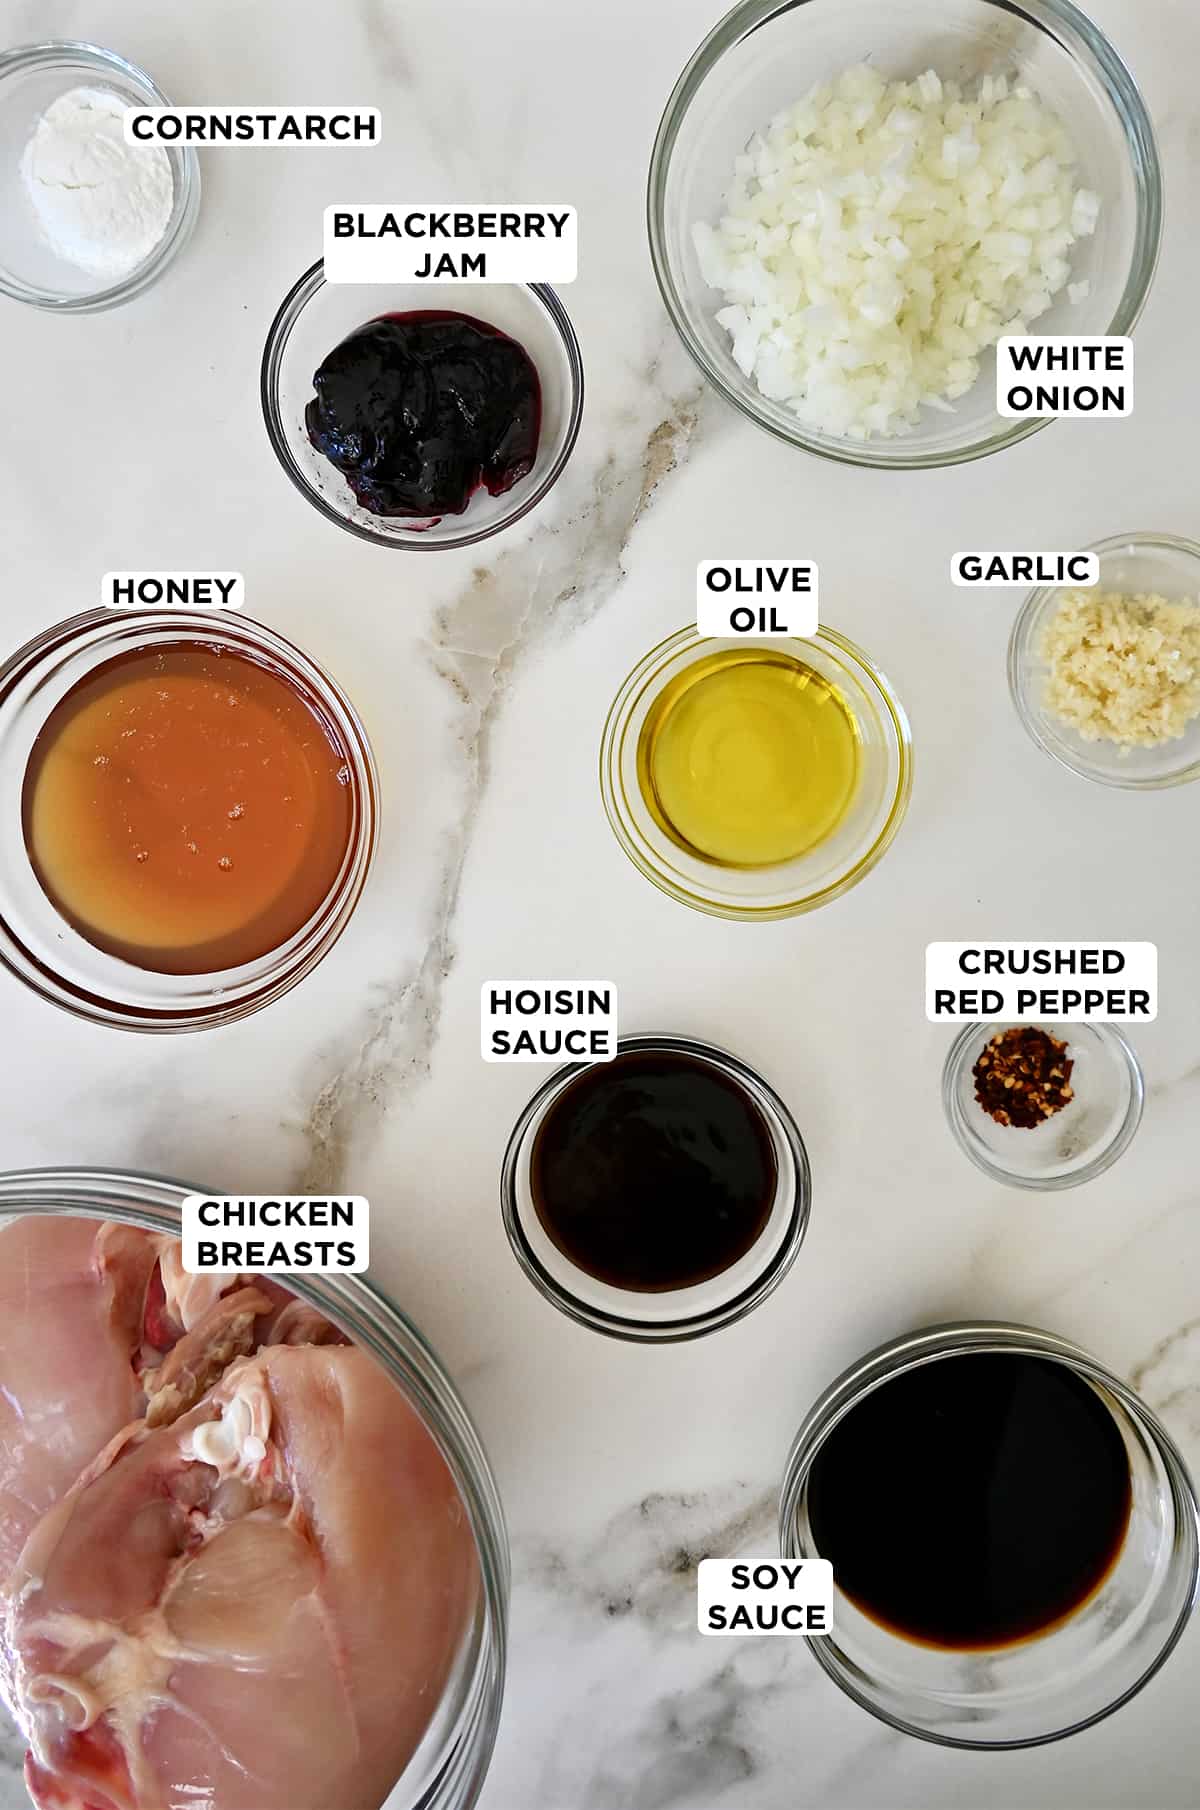 Various sizes of glass bowls containing the ingredients needed to make honey garlic chicken, including cornstarch, blackberry jam, diced white onion, olive oil, minced garlic, crushed red pepper flakes, hoisin sauce, honey, chicken breasts and soy sauce.